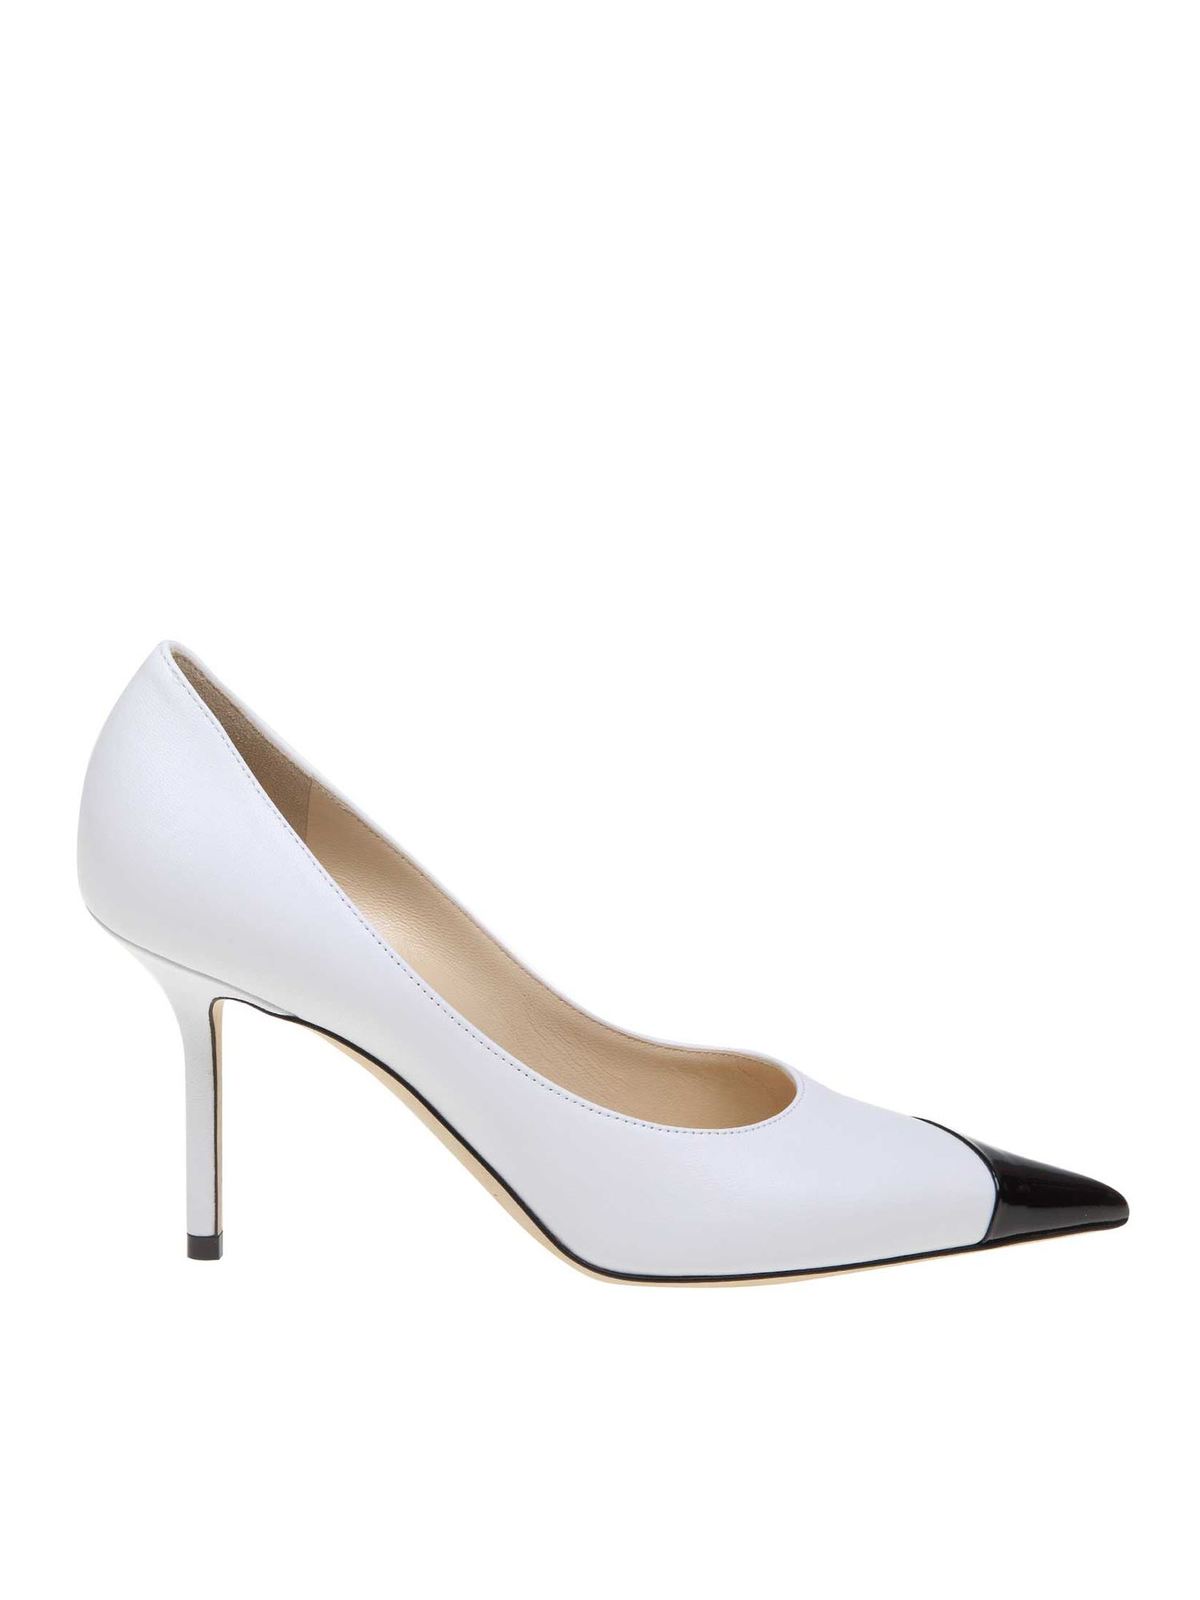 shoes Jimmy Choo - Love 85 pumps in white leather - LOVE85ZYZBLACK&WHITE